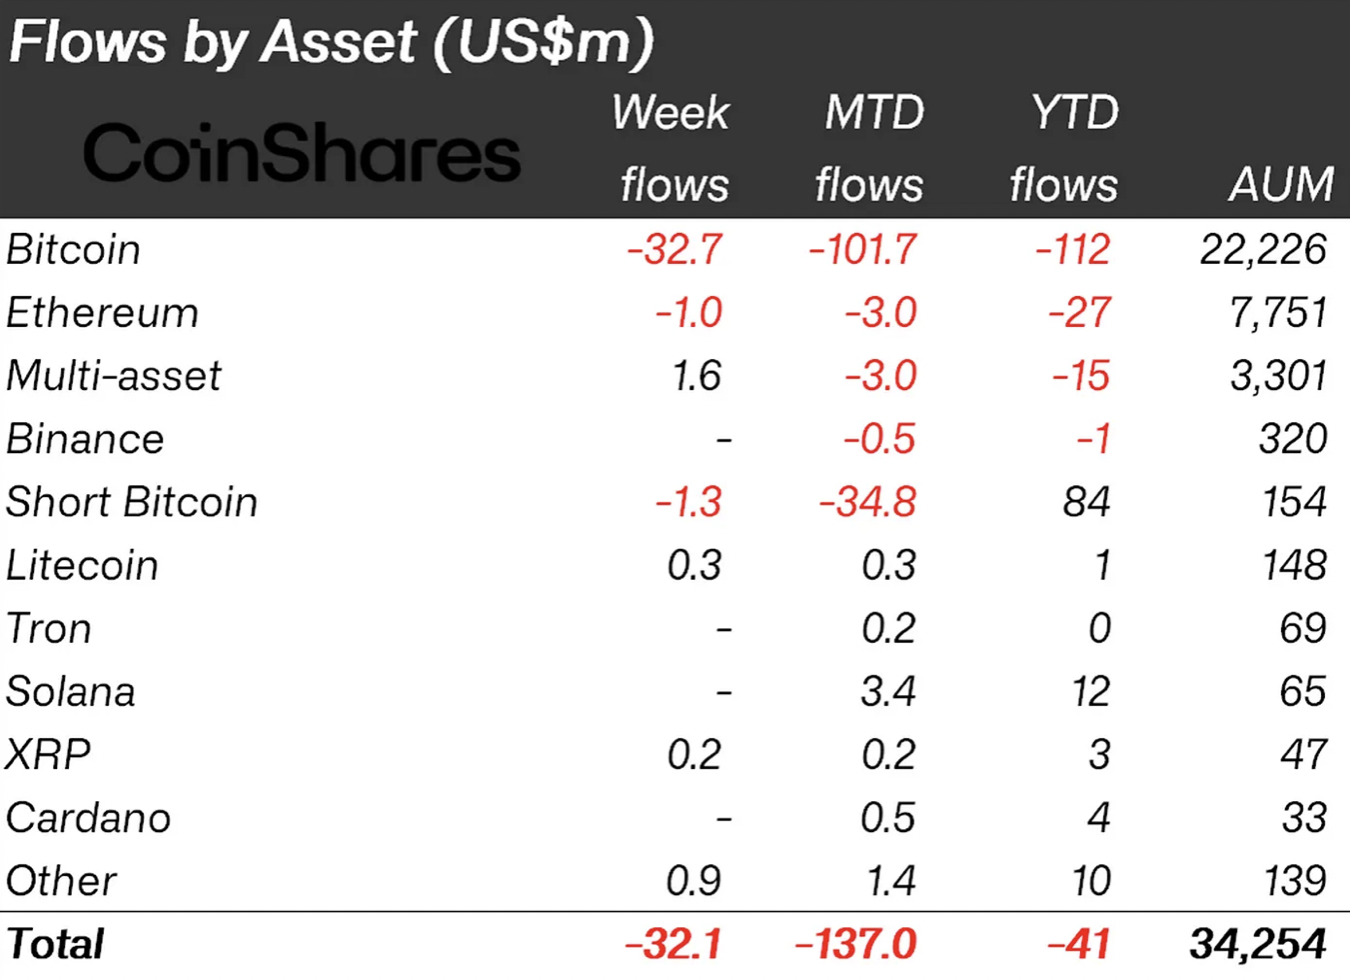 Weekly capital flows by asset